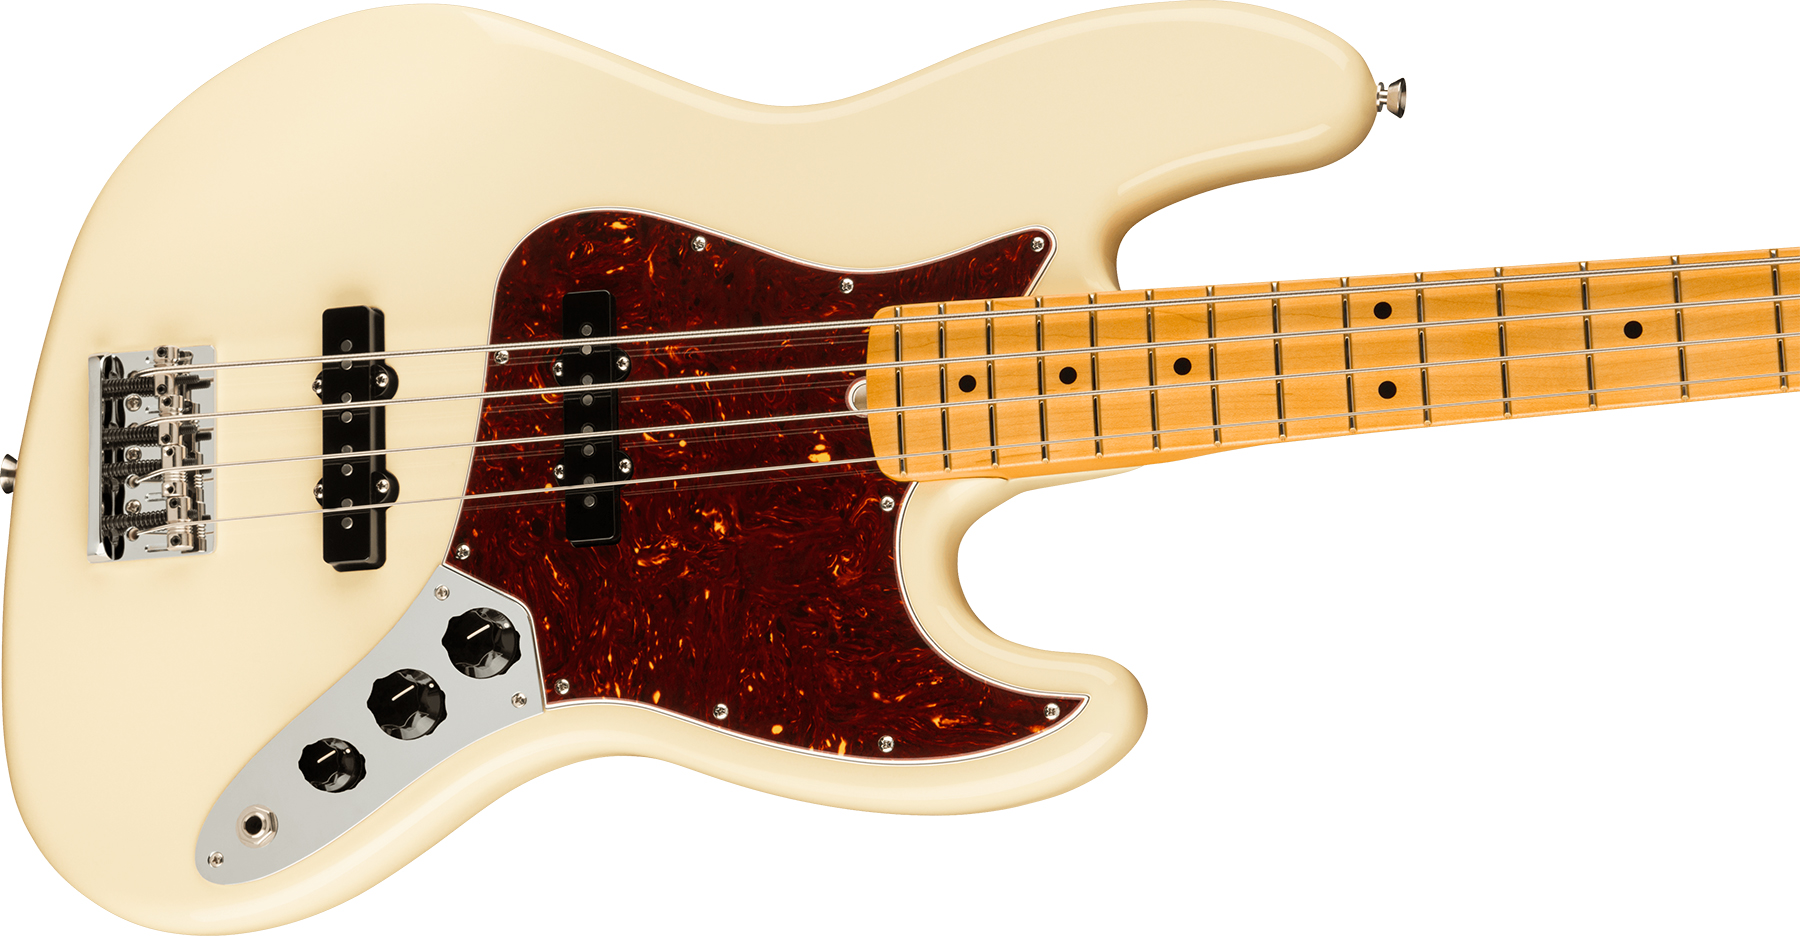 Fender Jazz Bass American Professional Ii Usa Mn - Olympic White - Solid body electric bass - Variation 3